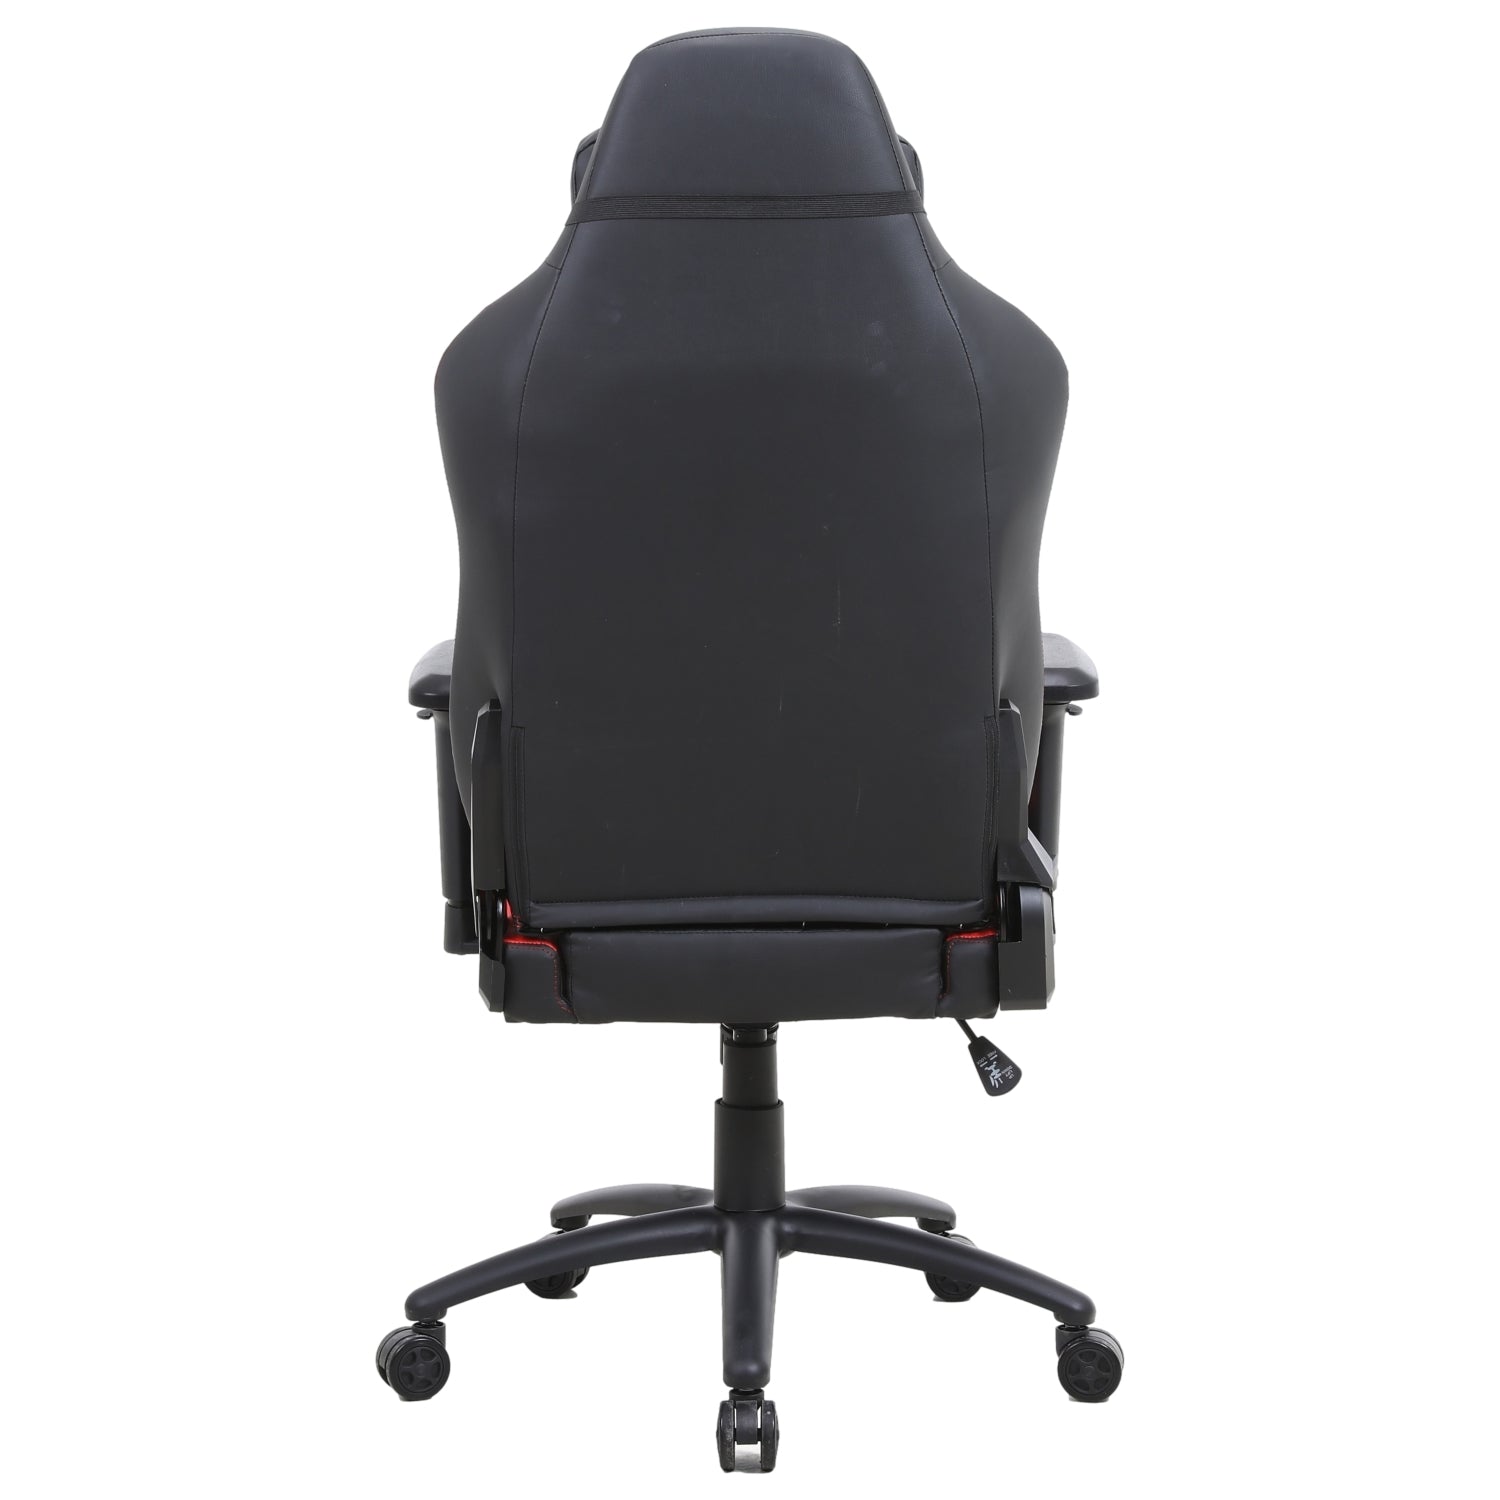 ViscoLogic NINJA Premium QUality Ergonomic Sports Styled Home Office Computer Gaming Chair (Black & Red)